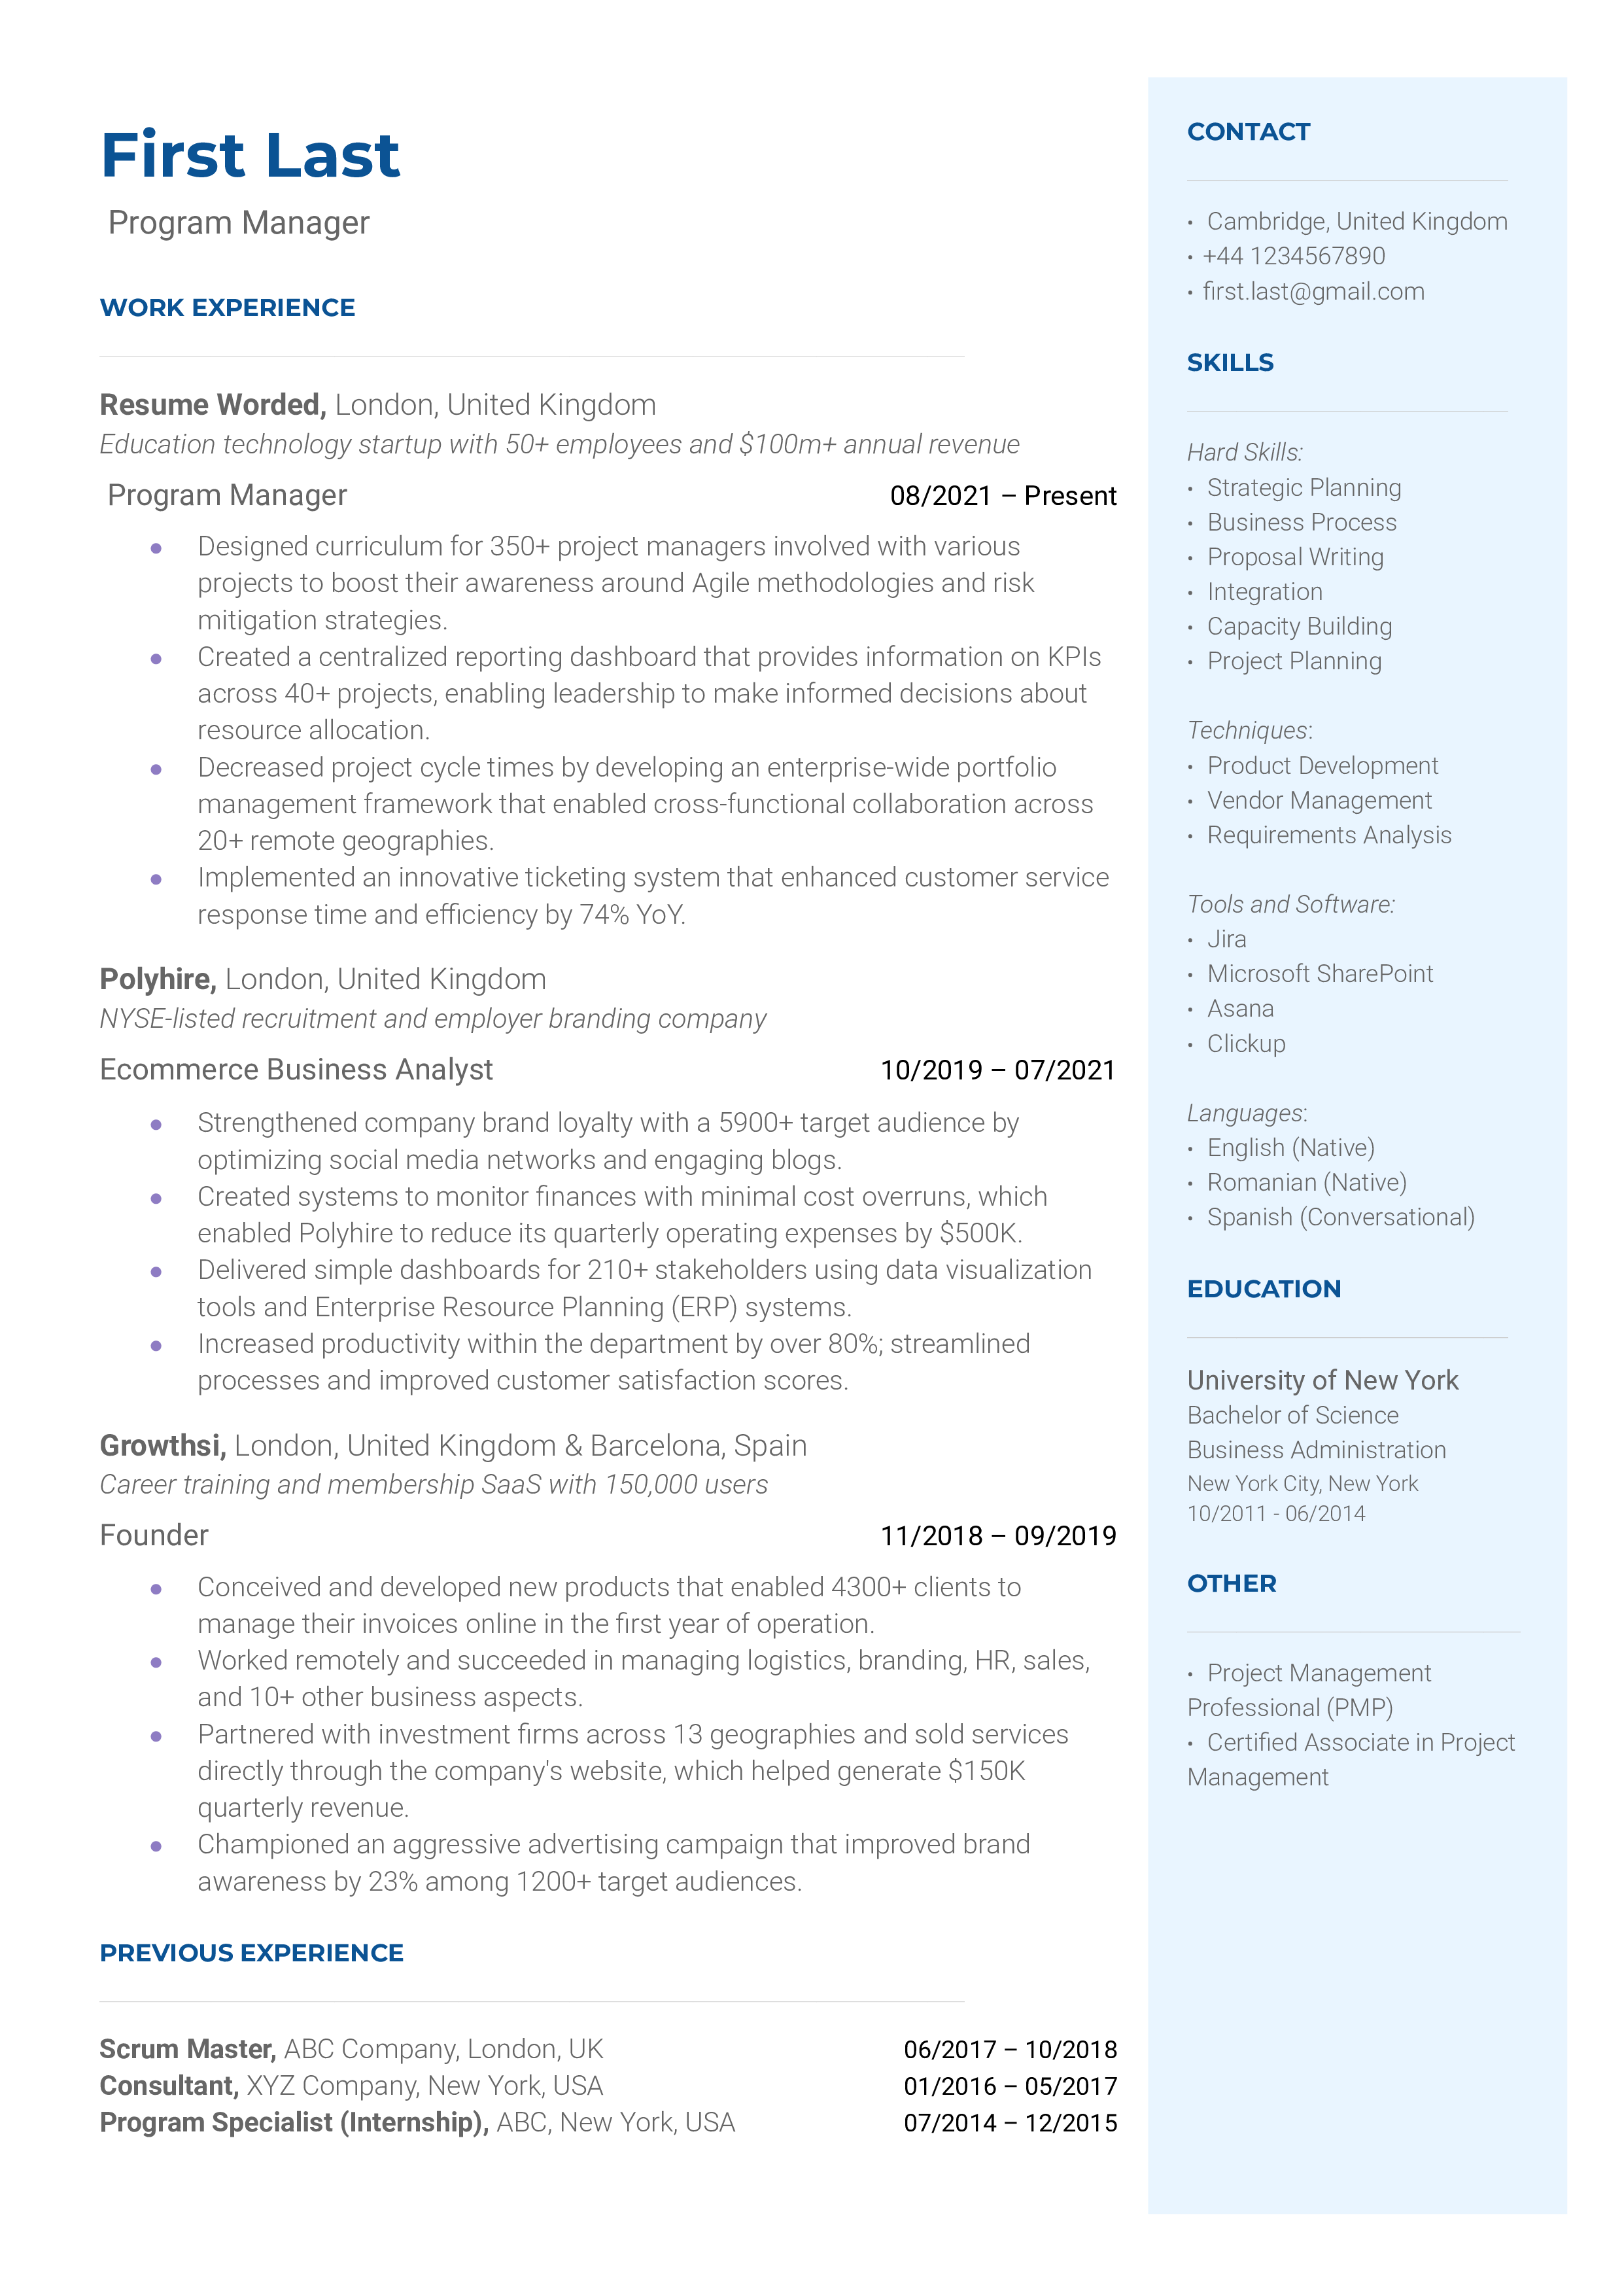 A well-structured CV for a Program Manager showcasing key skills and experiences.